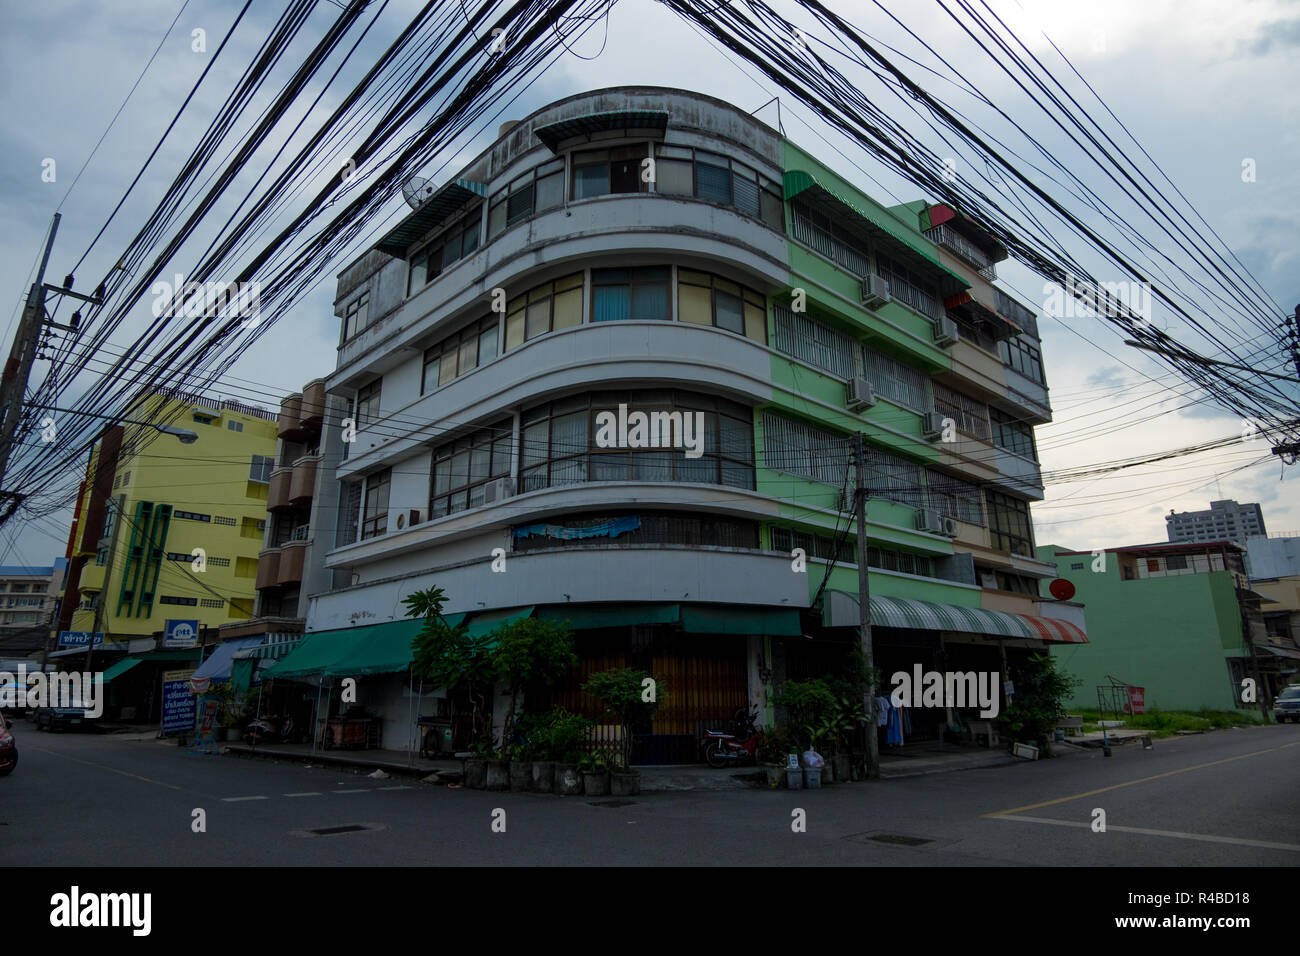 Power lines dominate the skyline in front of an Art Deco style building in Hat Yai, Thailand. Stock Photo